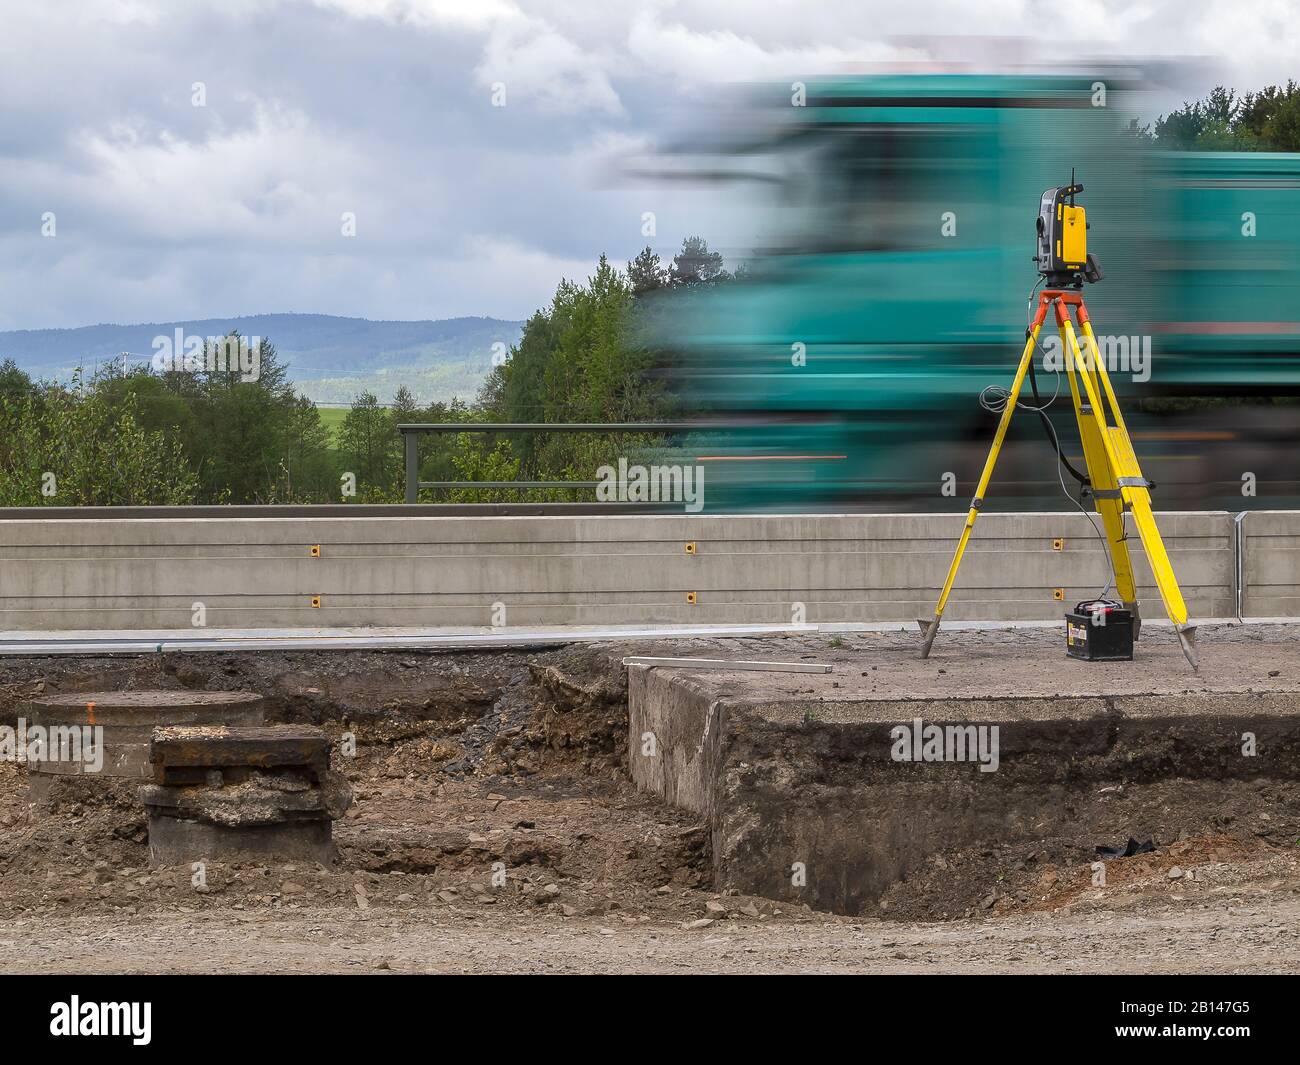 Laser measuring device, road construction Stock Photo